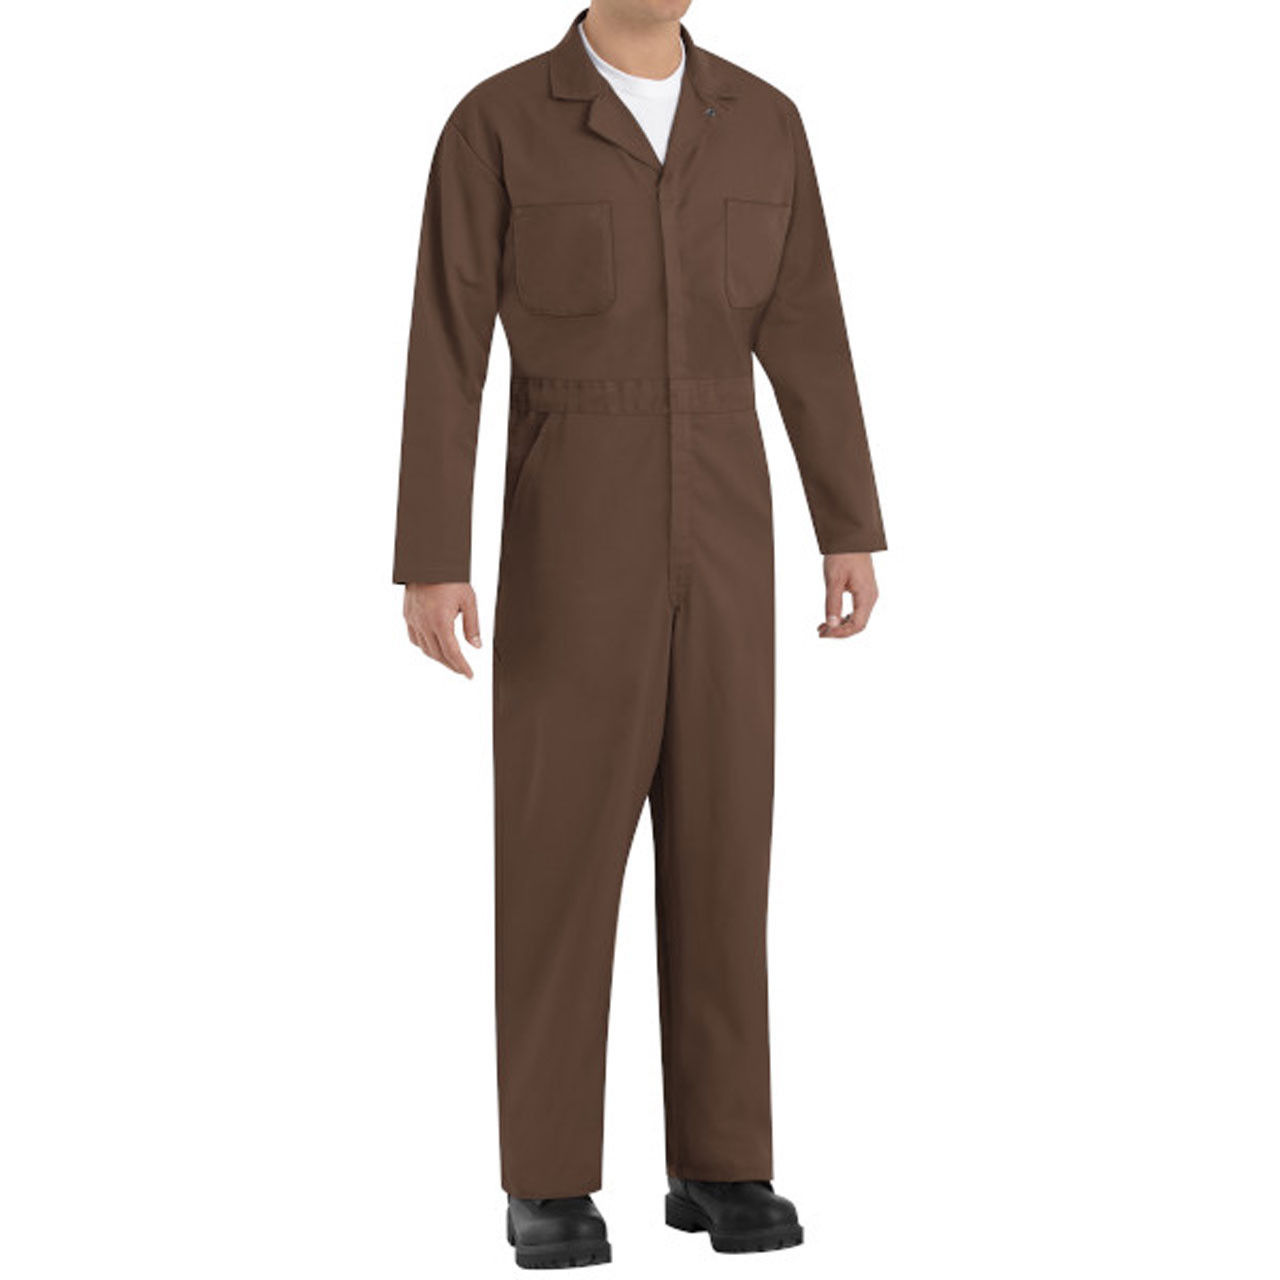 Does the Twill Action Back have a special finish on its brown coveralls?